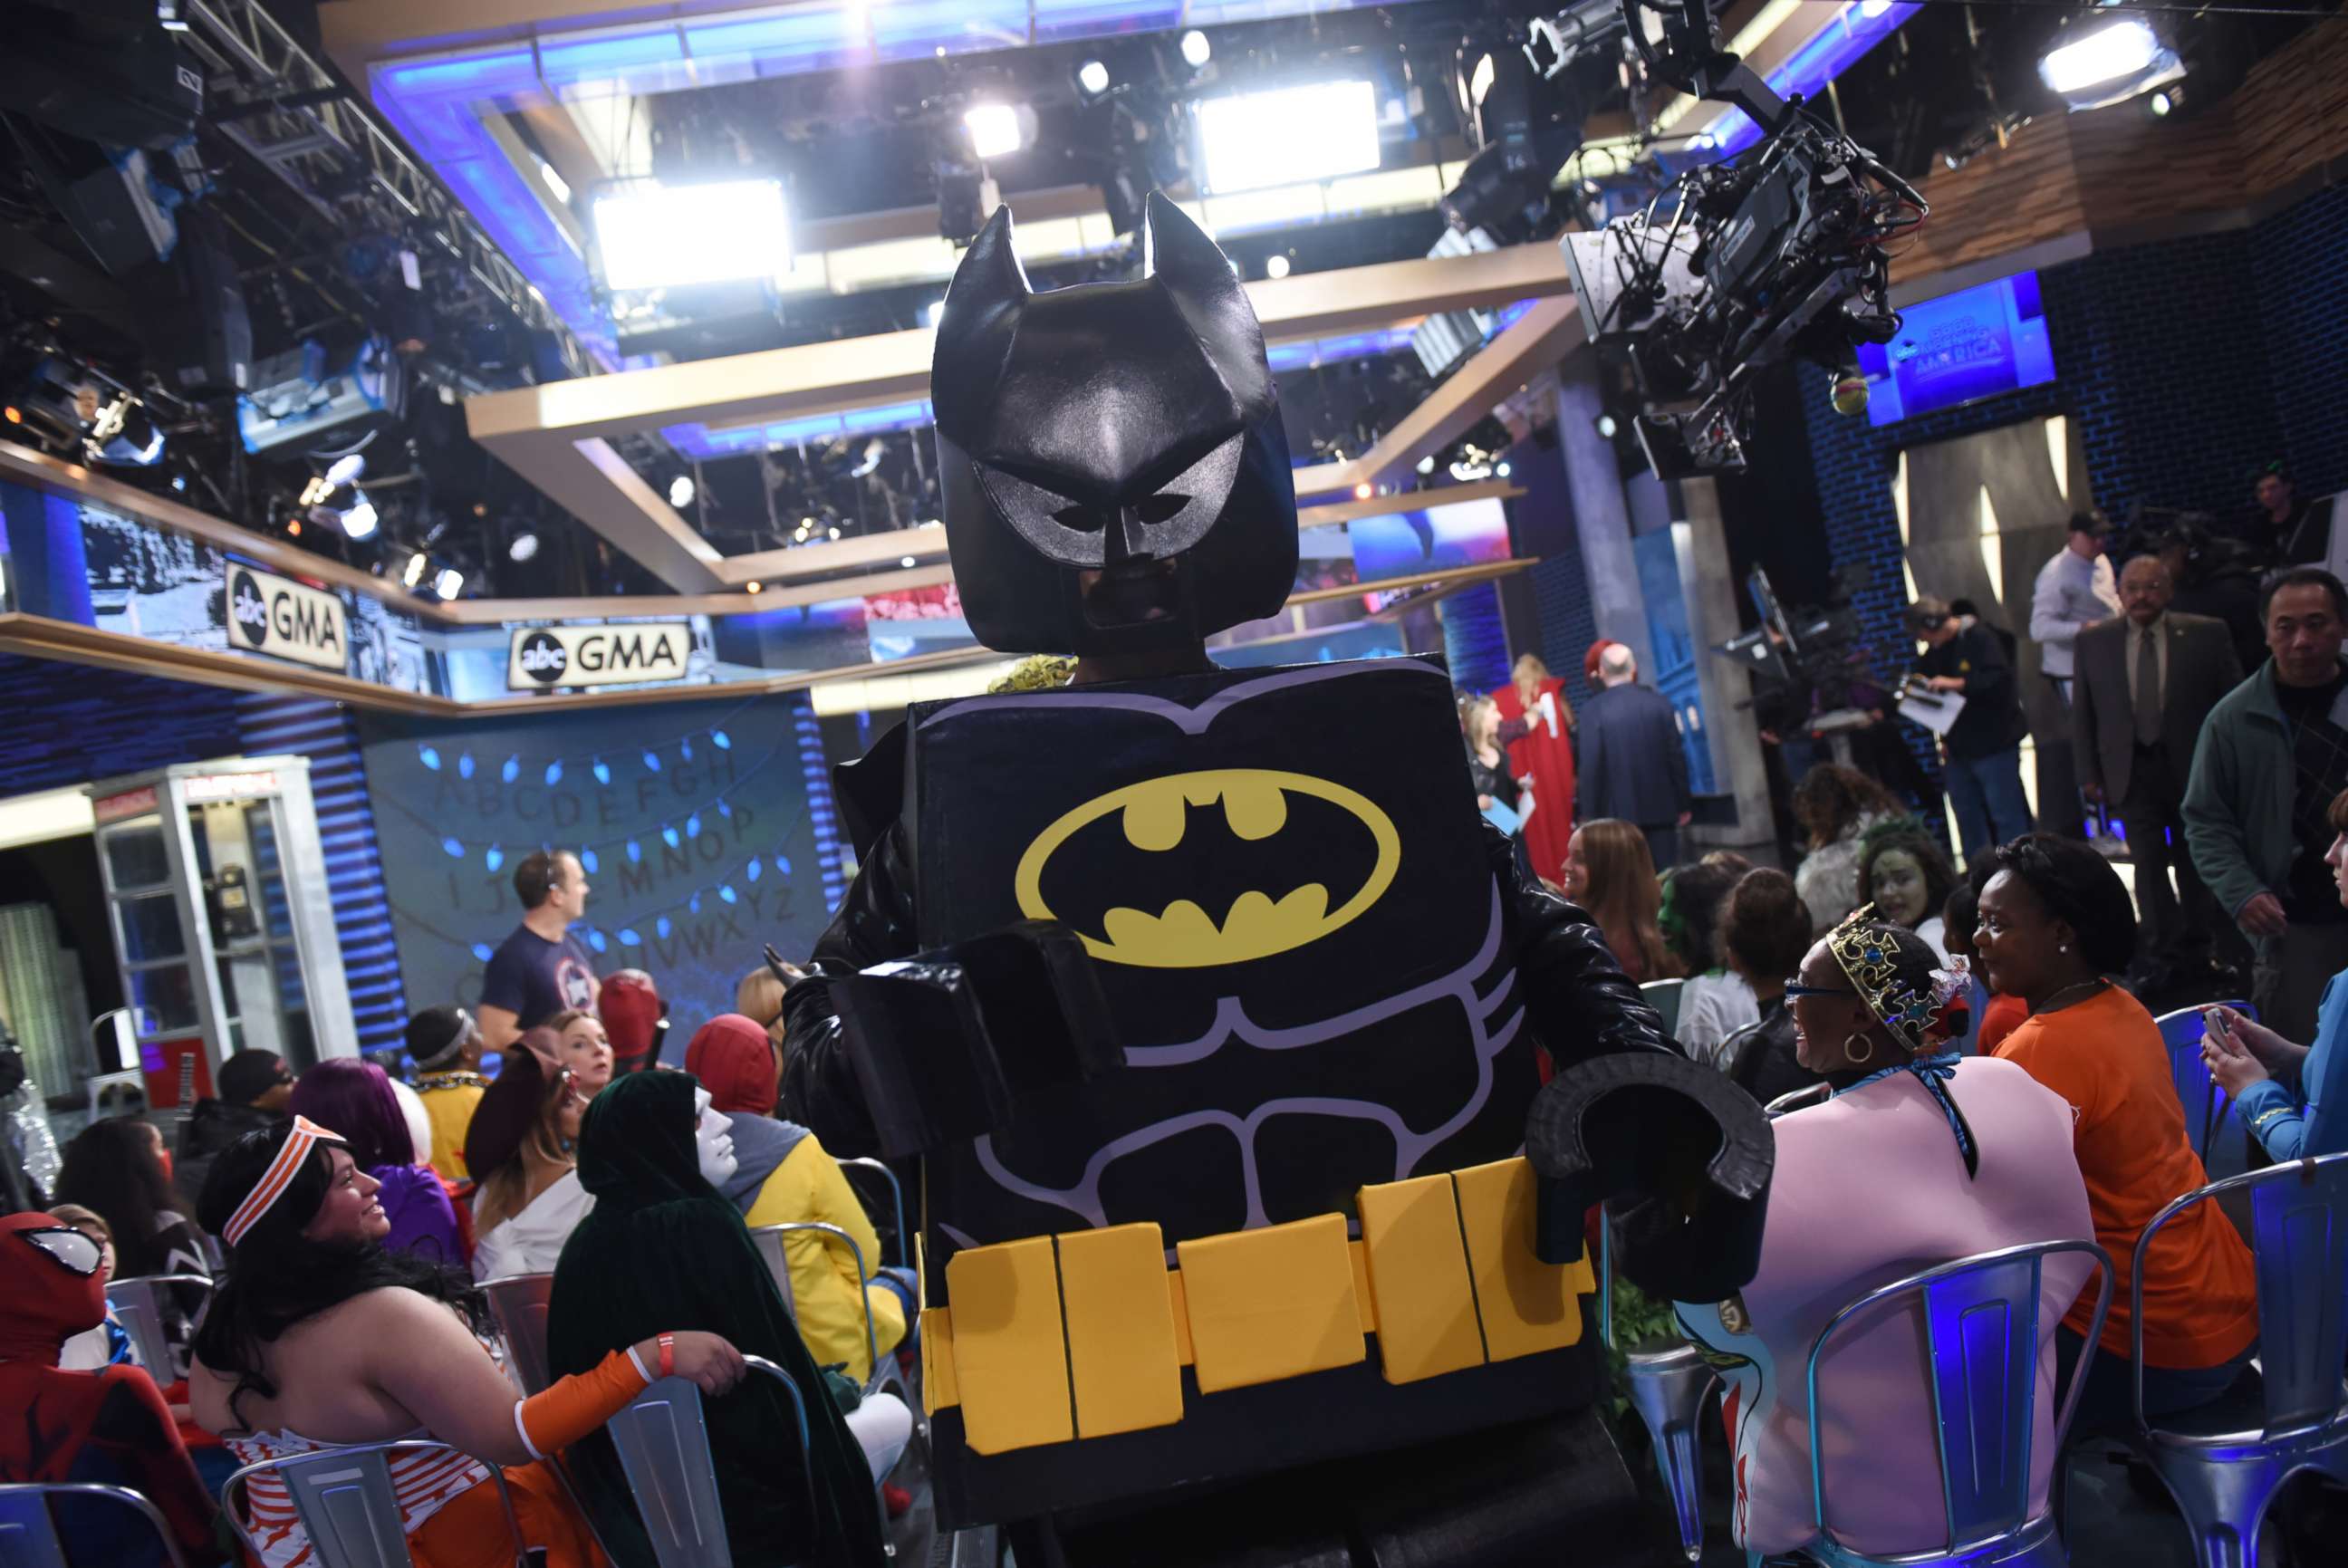 PHOTO: "Good Morning America" meteorologist Rob Marciano dressed as Lego Batman in a Halloween show full of superheroes.